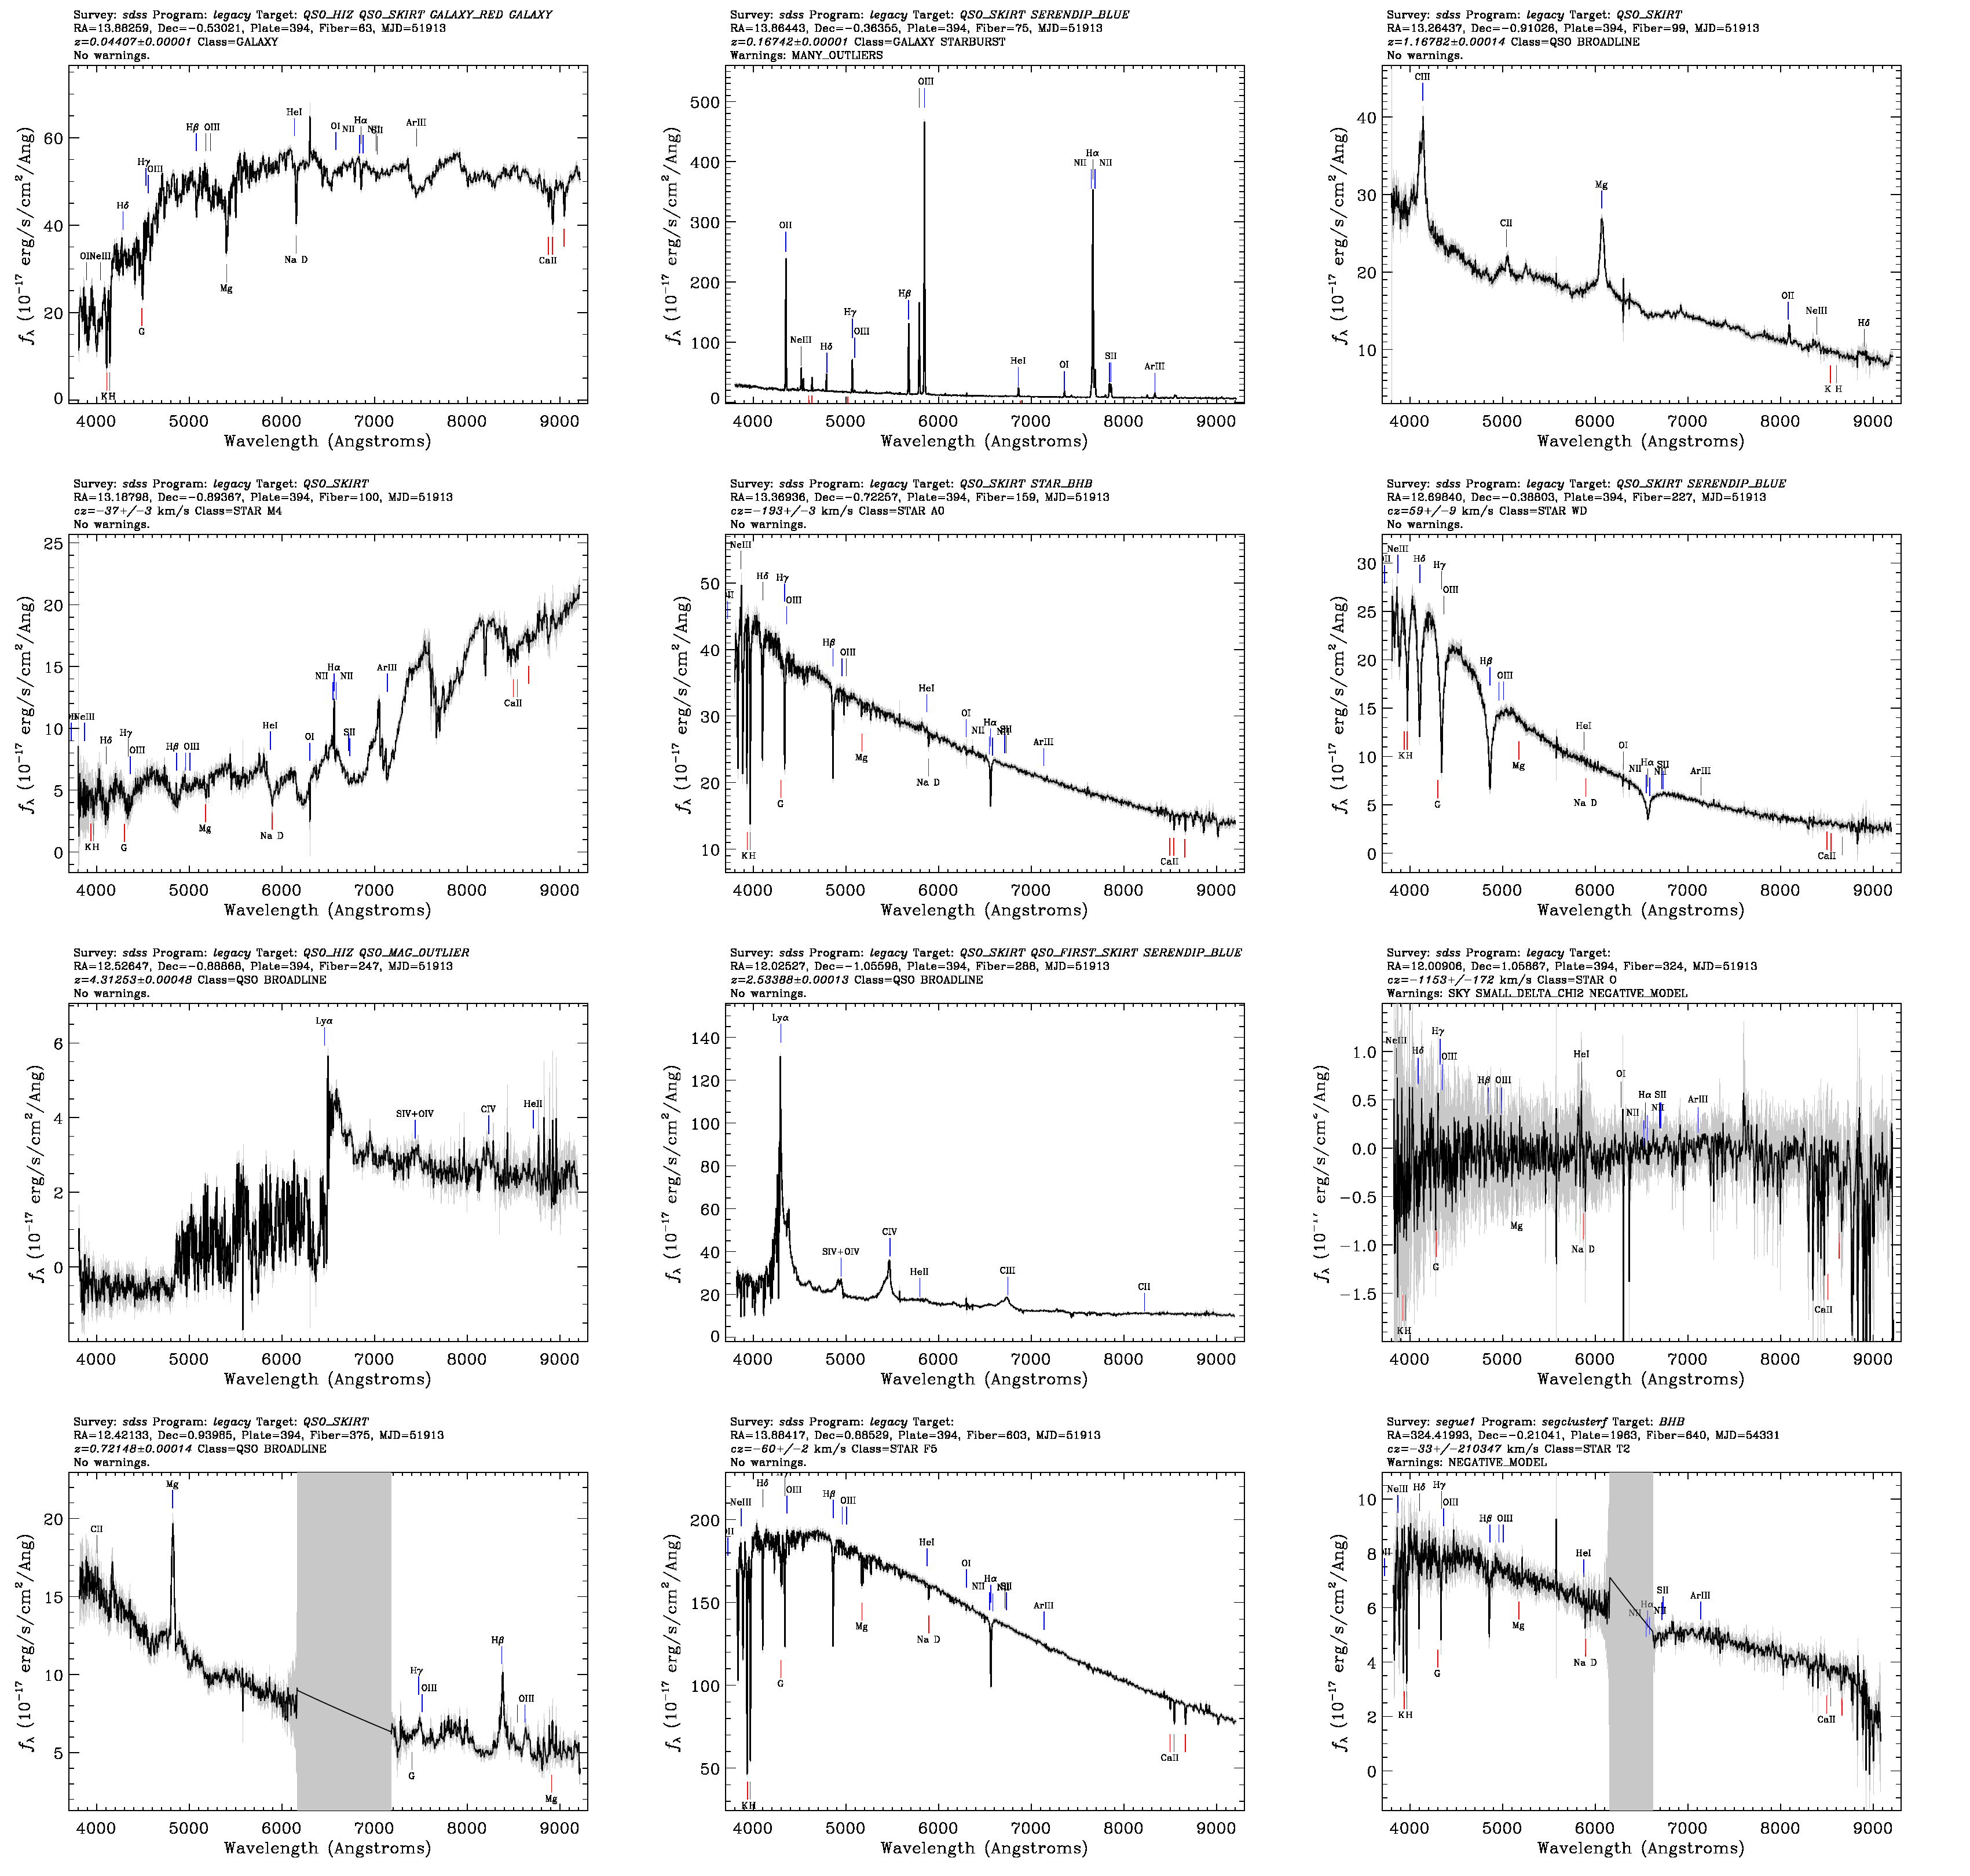 Some selected SDSS spectra (click for a larger image)